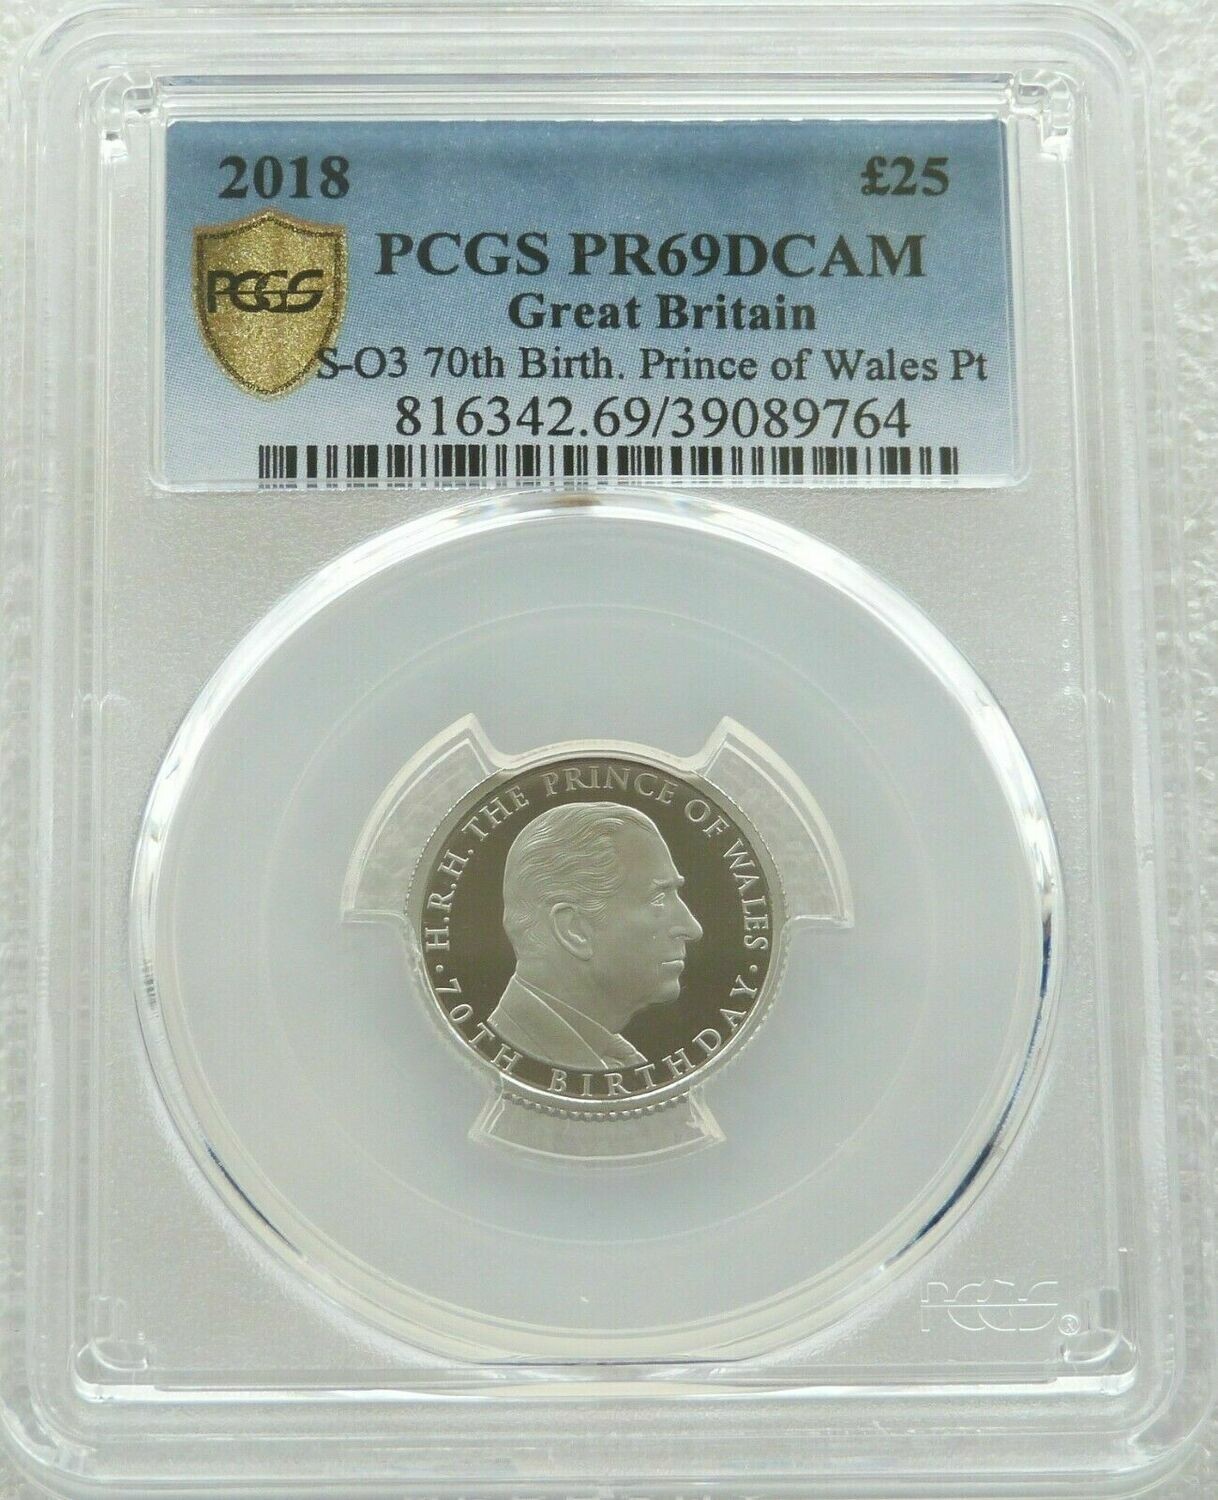 2018 Prince Charles of Wales £25 Platinum Proof 1/4oz Coin PCGS PR69 DCAM